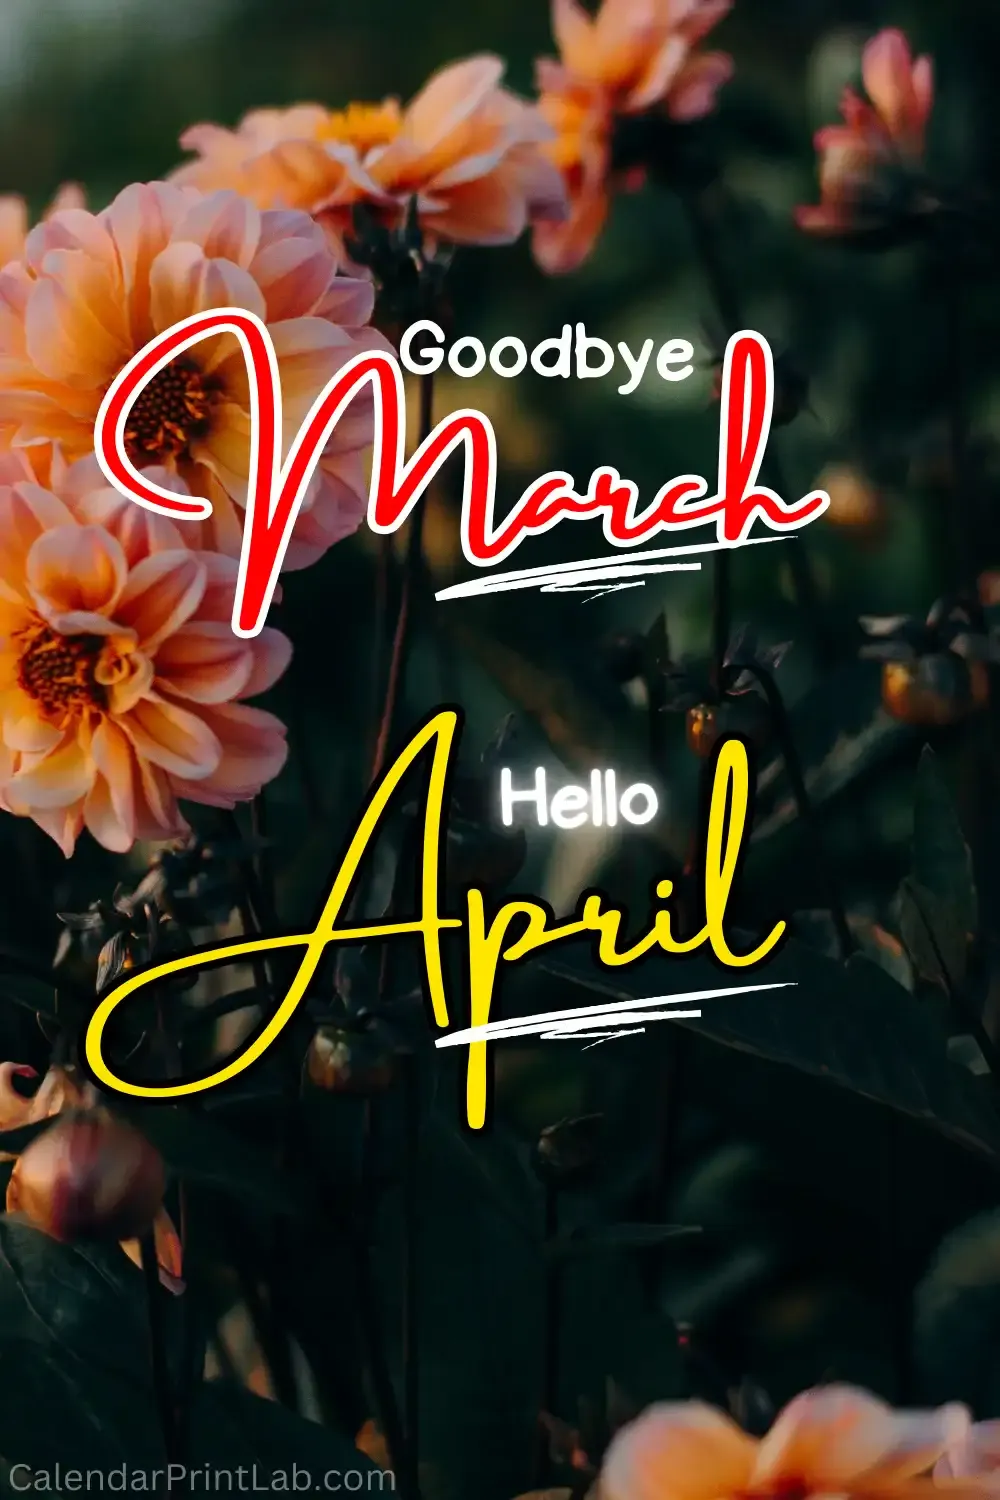 Goodbye March Hello April Image